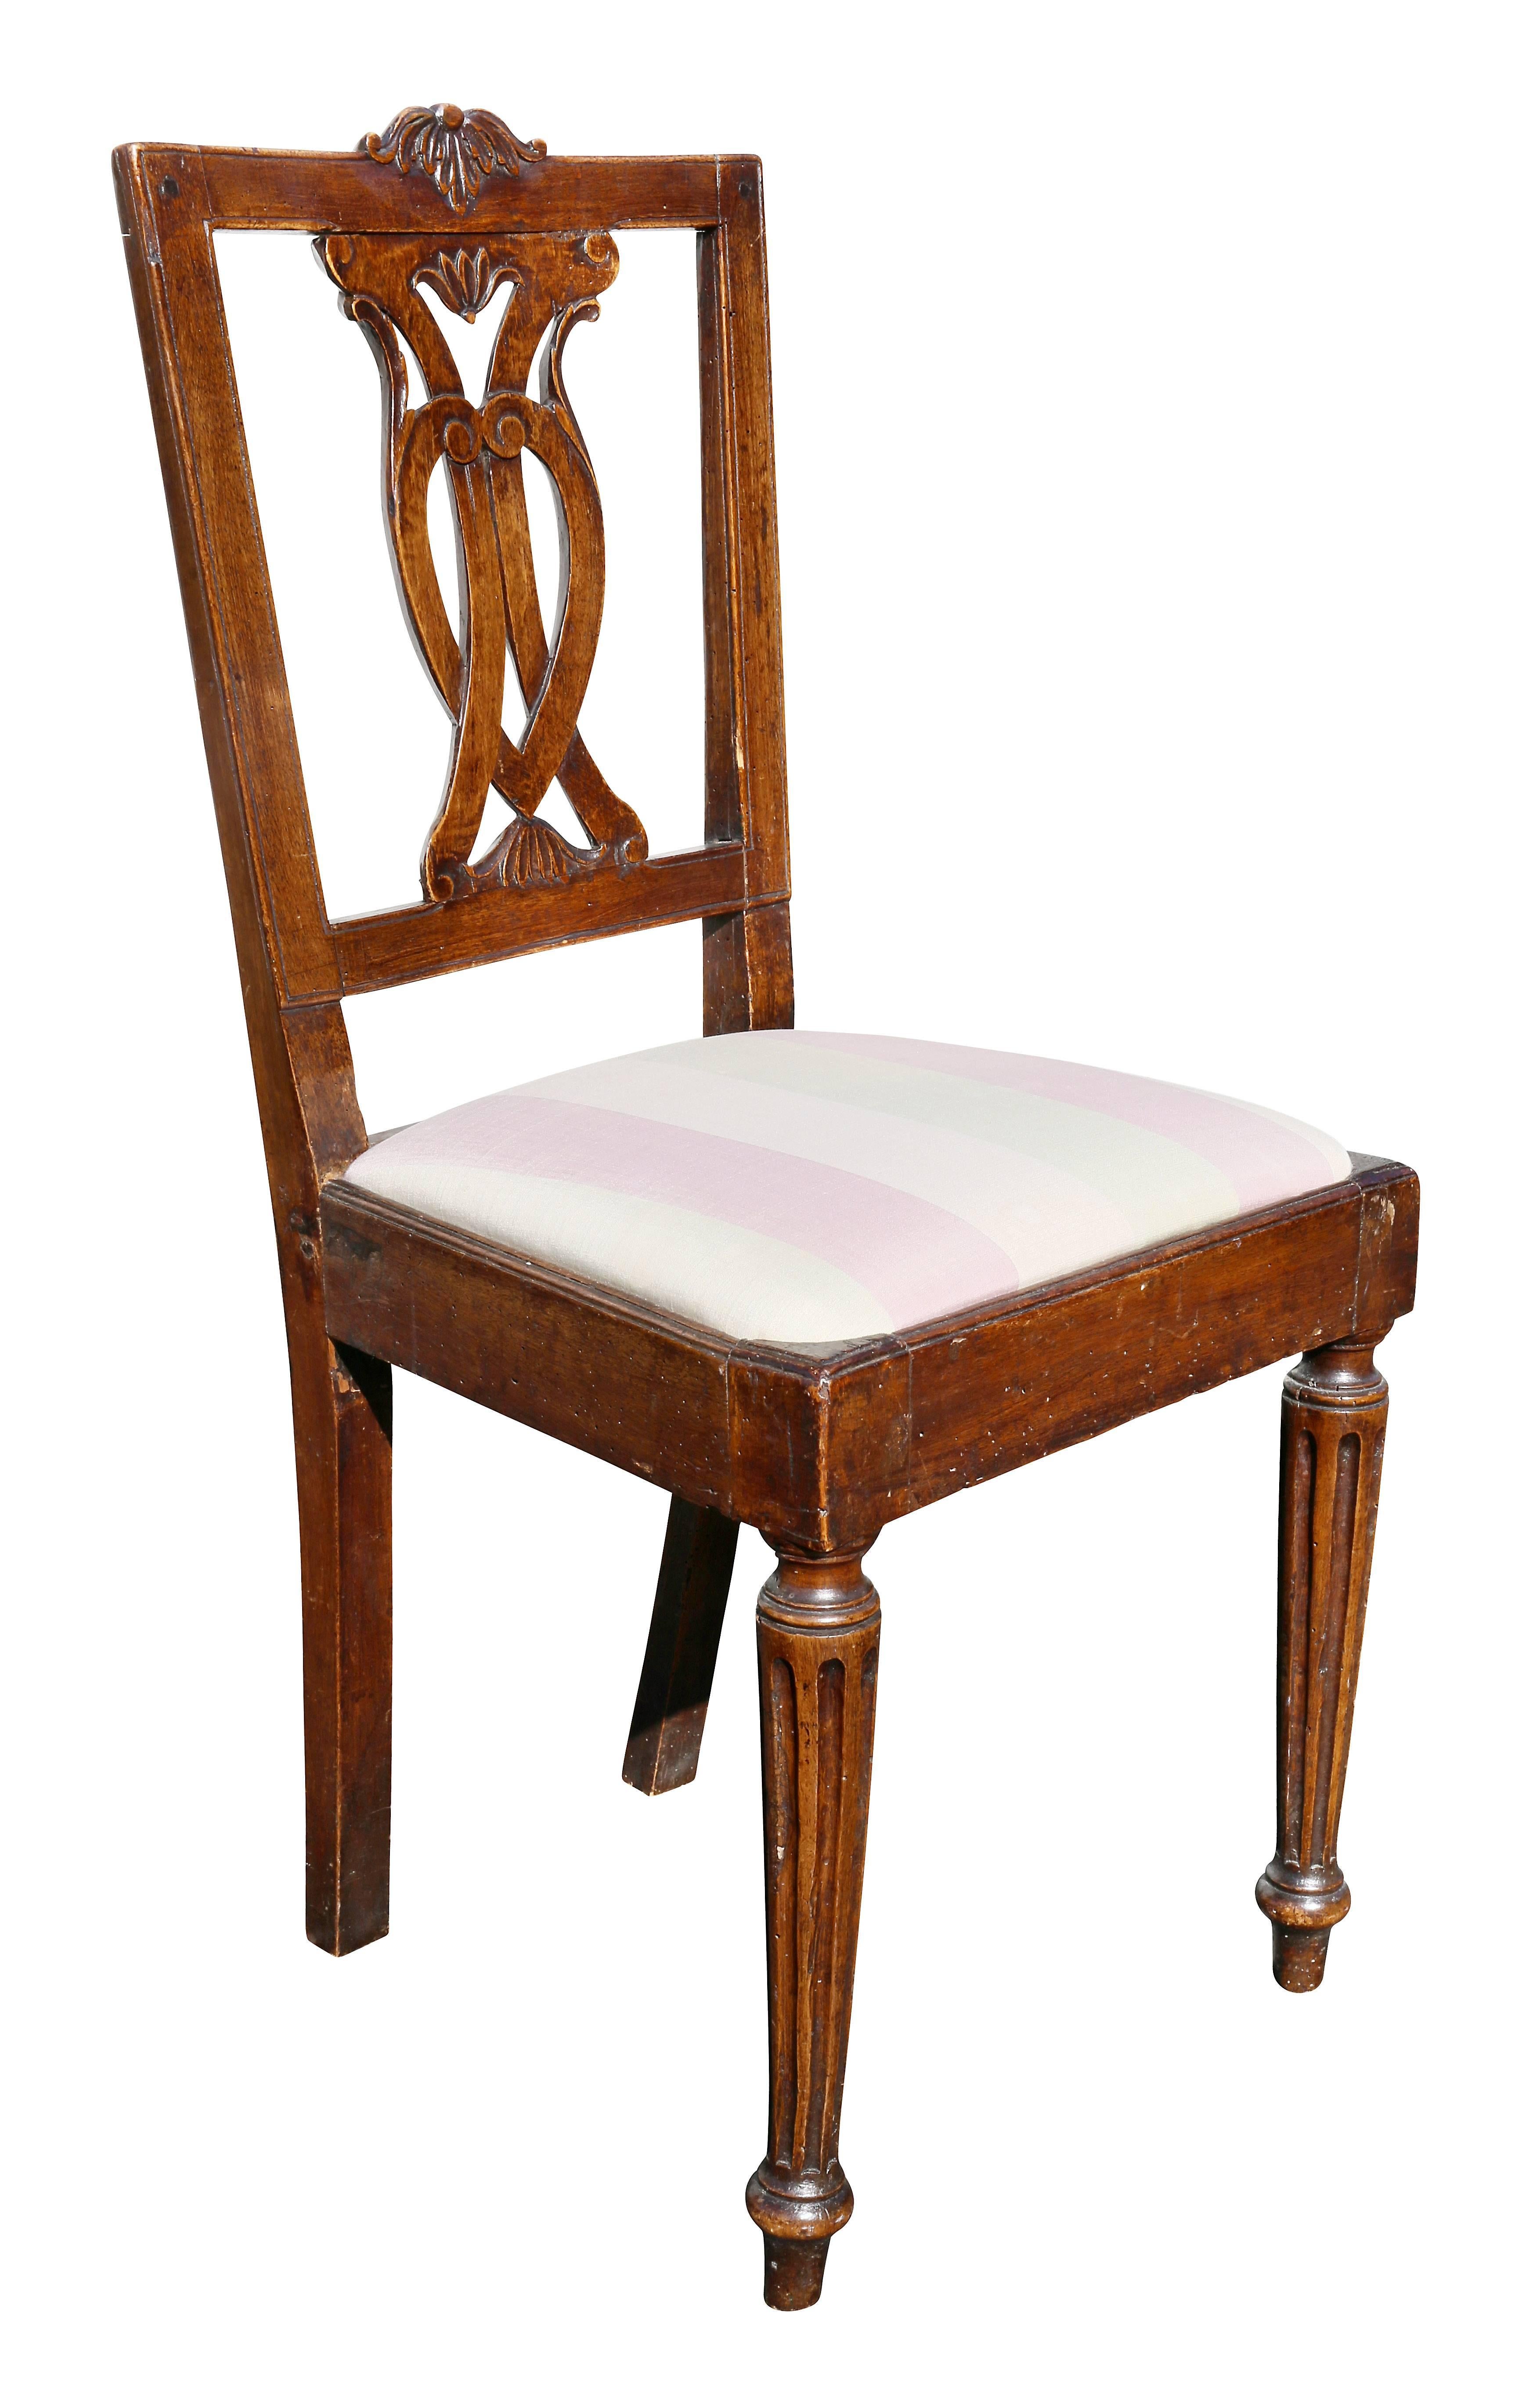 Each with a rectangular back with open splat, drop in seats, raised on circular fluted tapered legs.